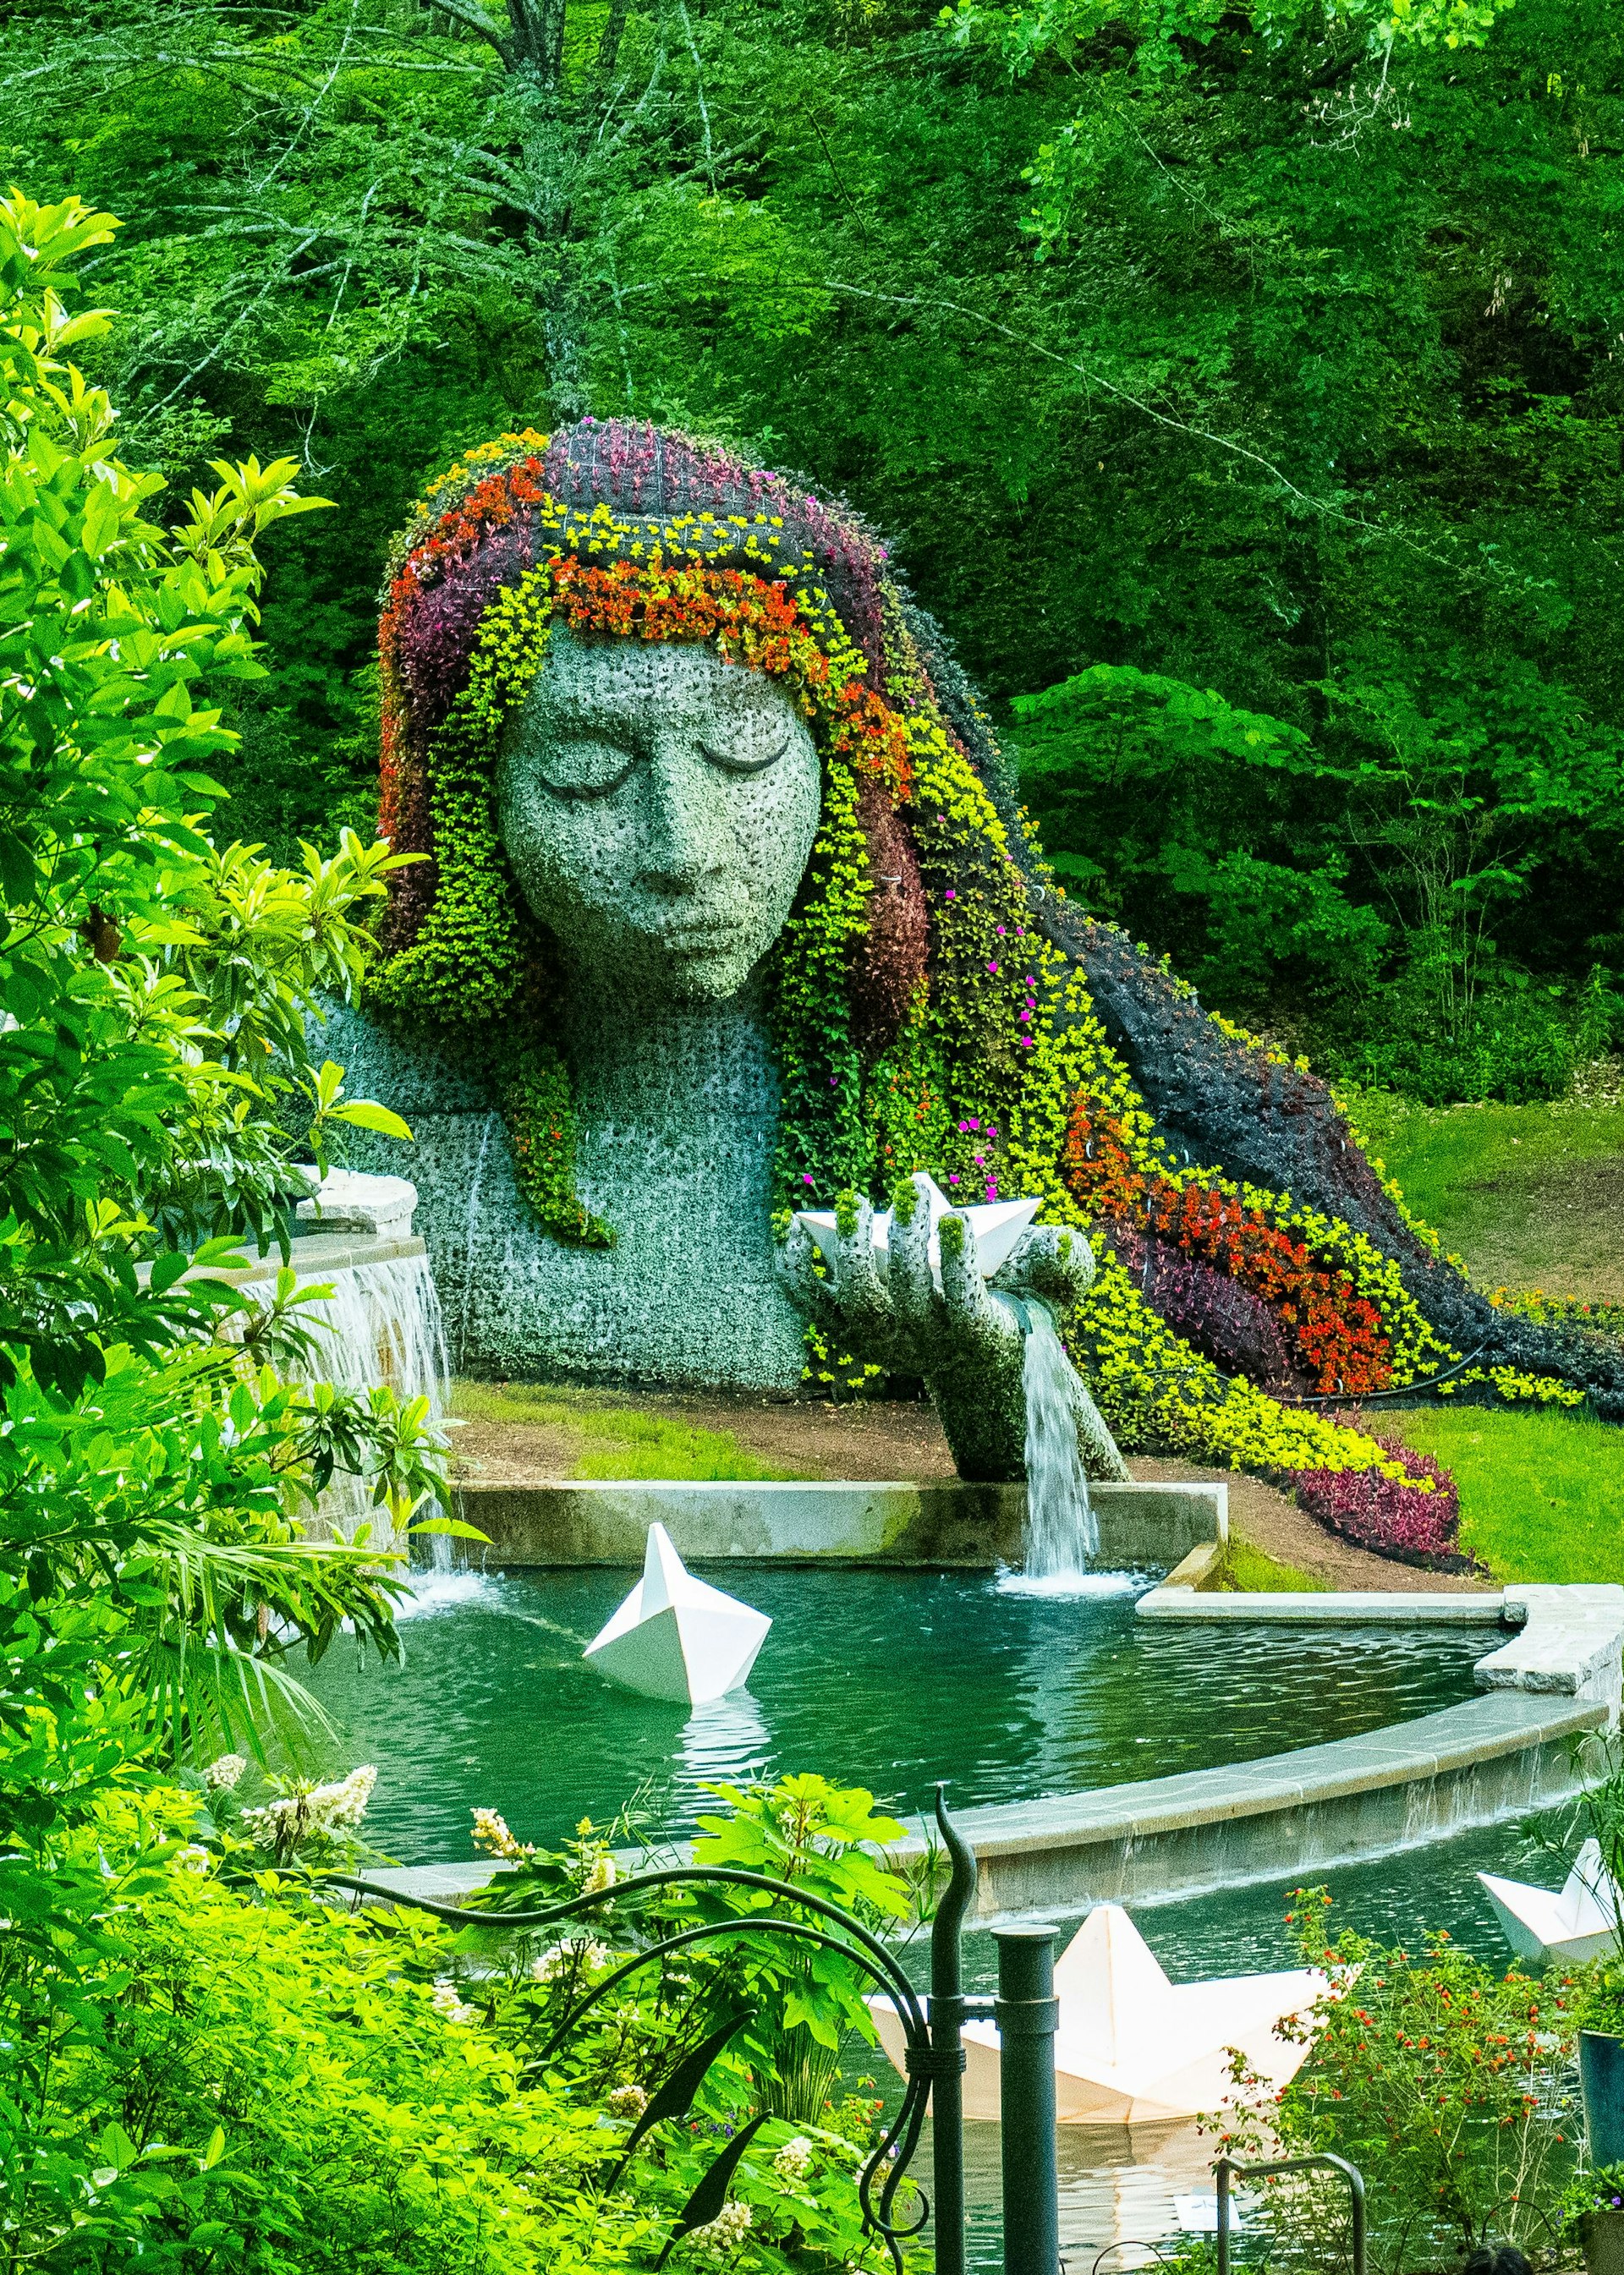 A water feature and floral display in the shape of a woman's head and shoulders at Atlanta Botanical Garden